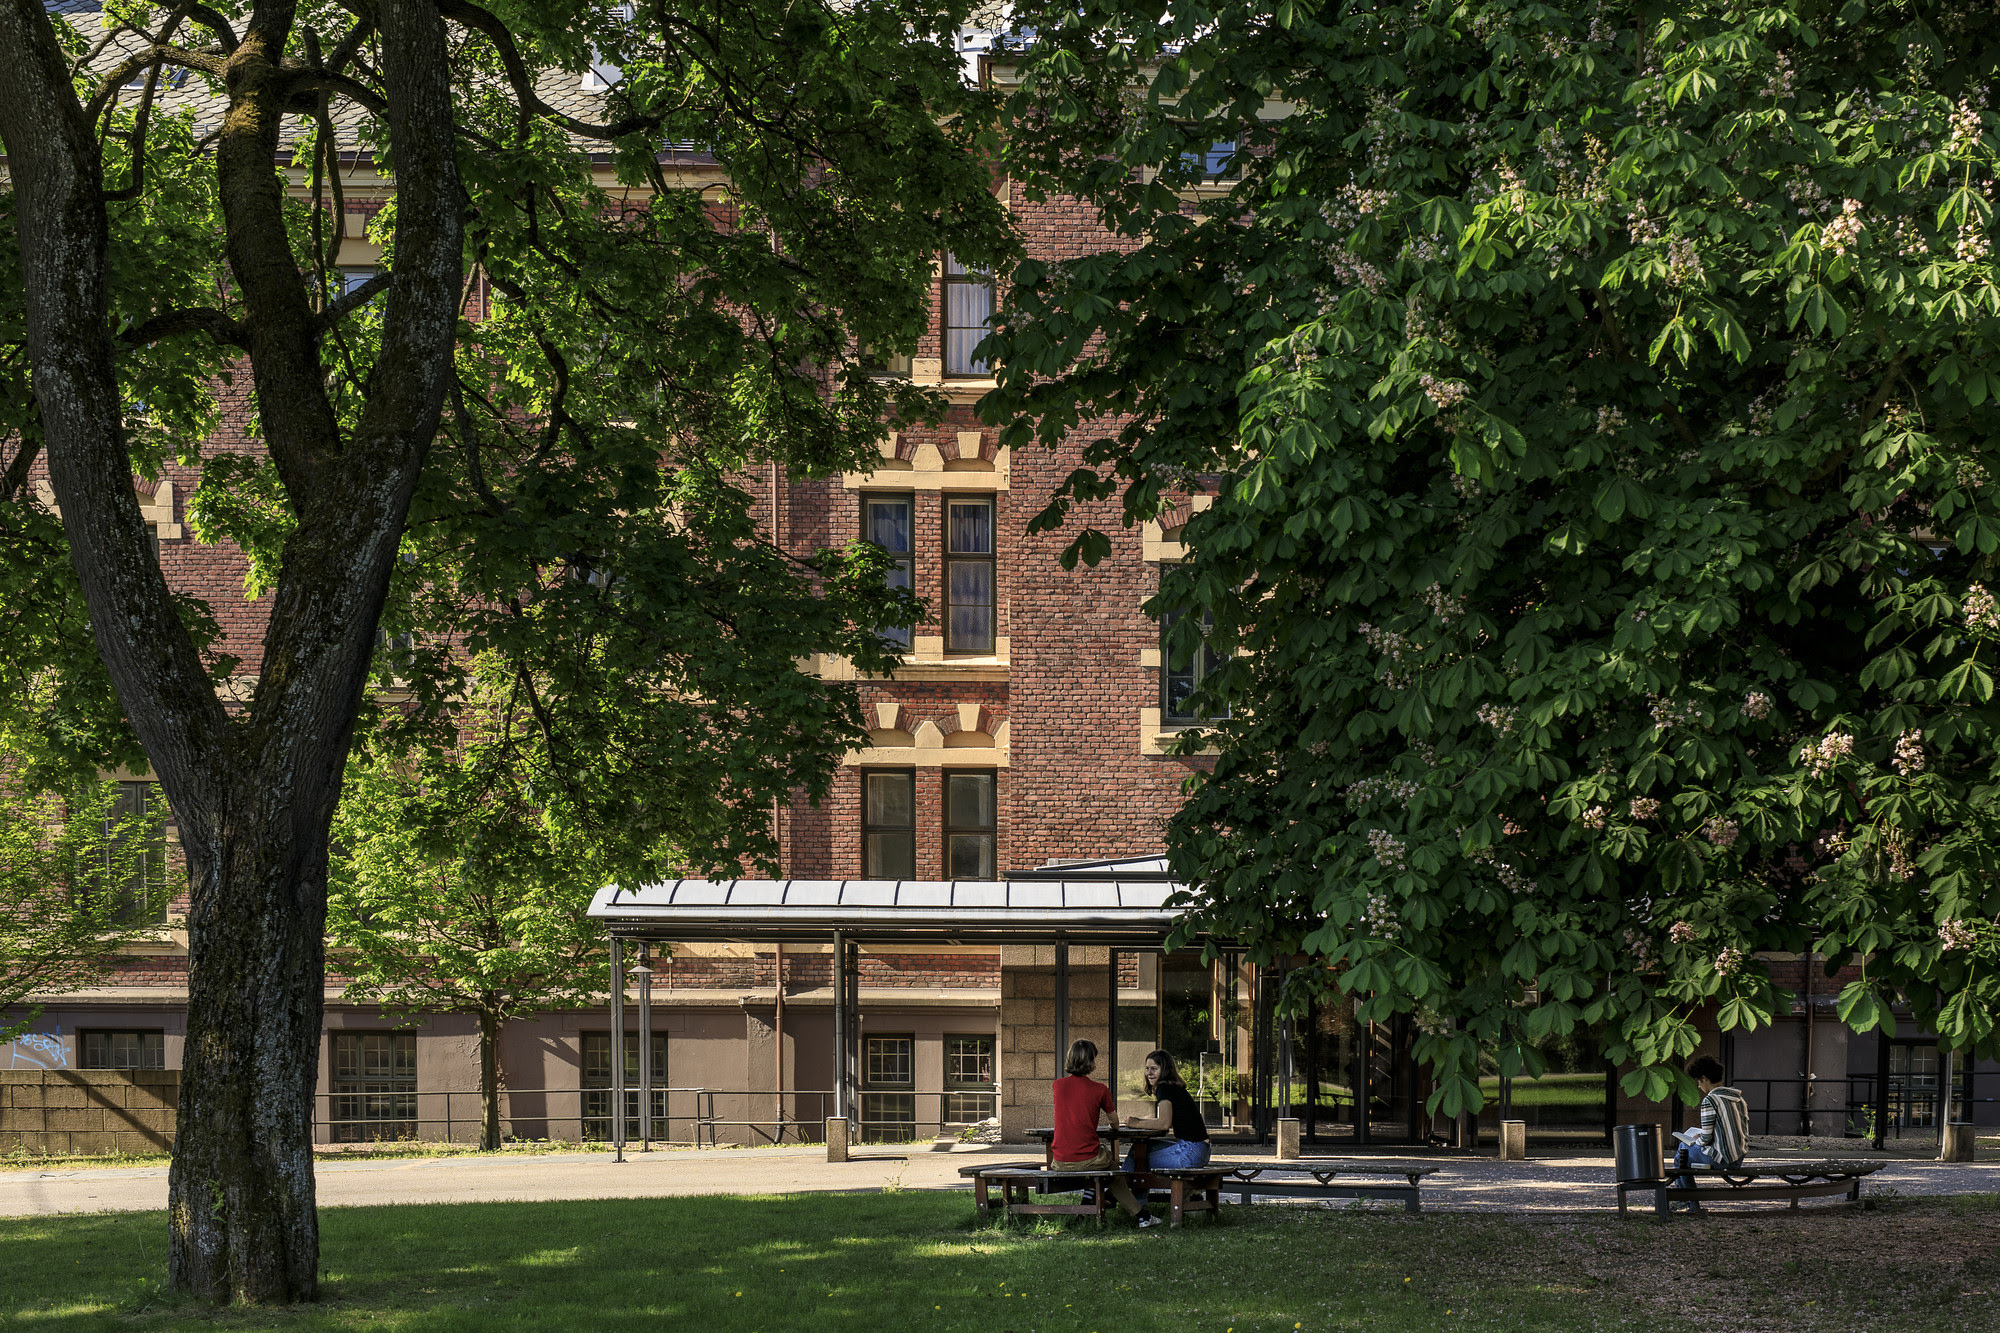 The City of Oslo announces new home for Oslo Biennial First Edition